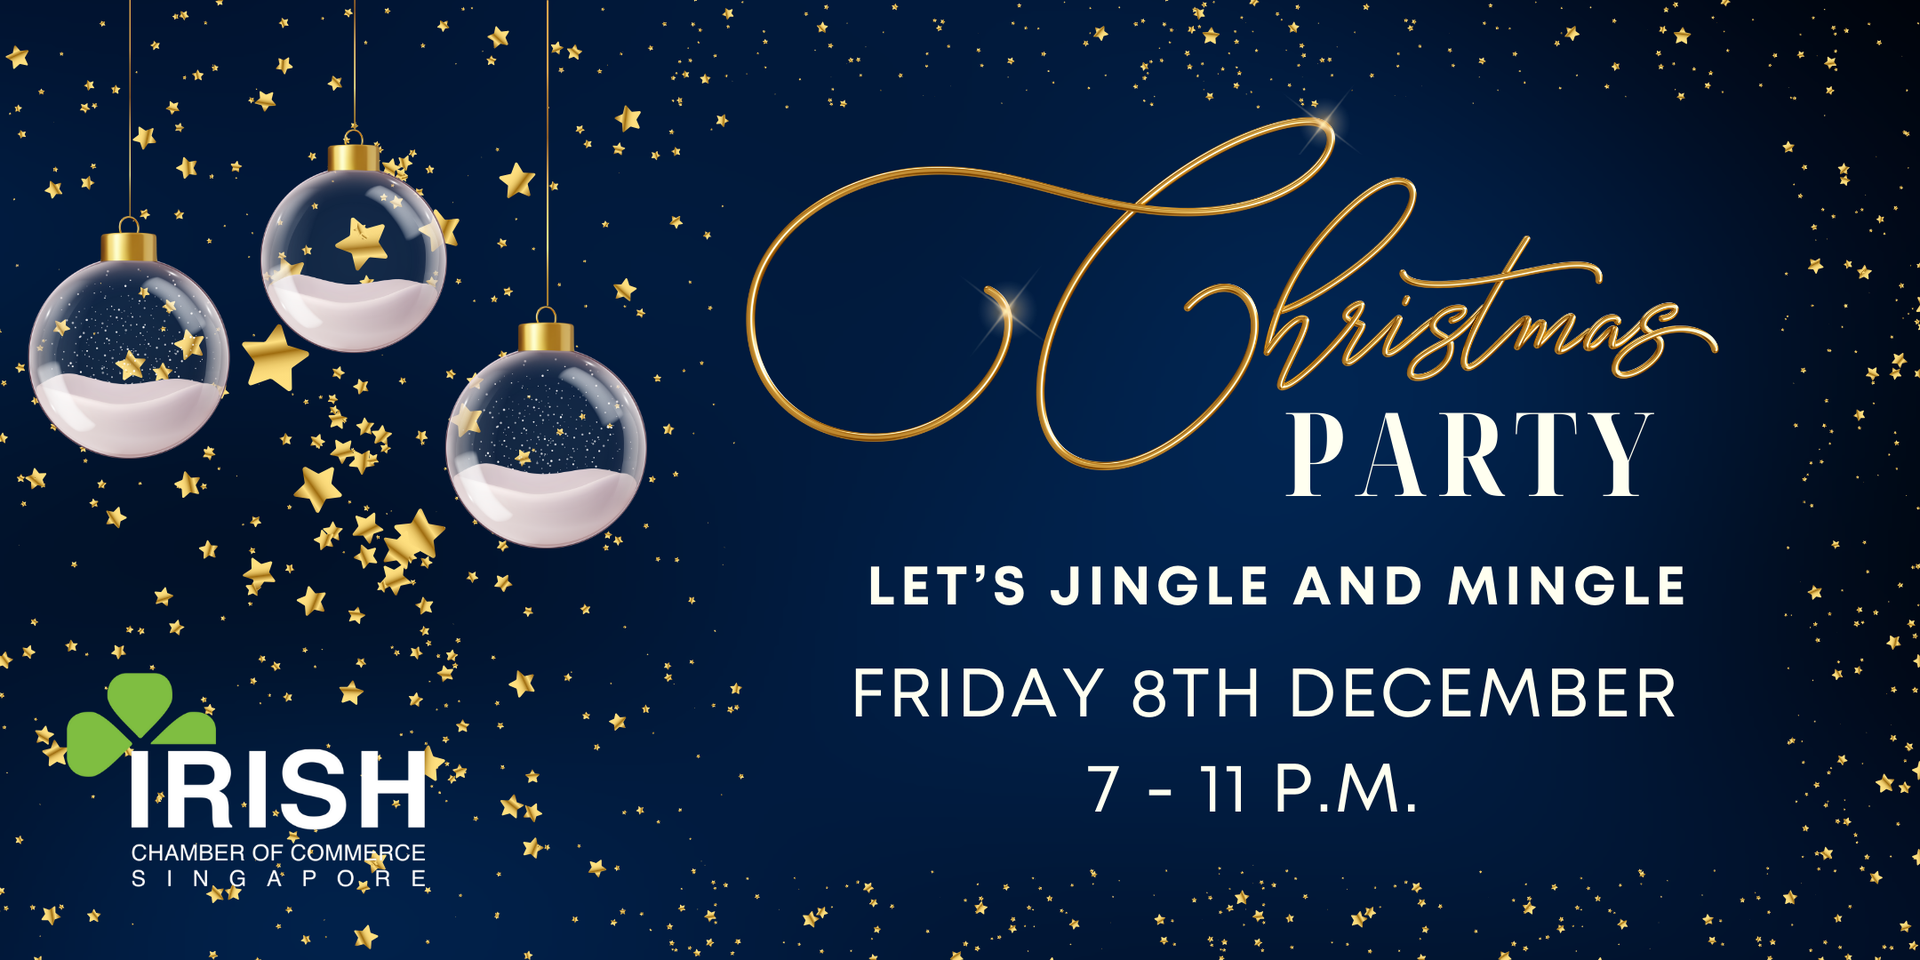 thumbnails Christmas Party - Let's jingle and mingle - 8th December 7 to 11 p.m.